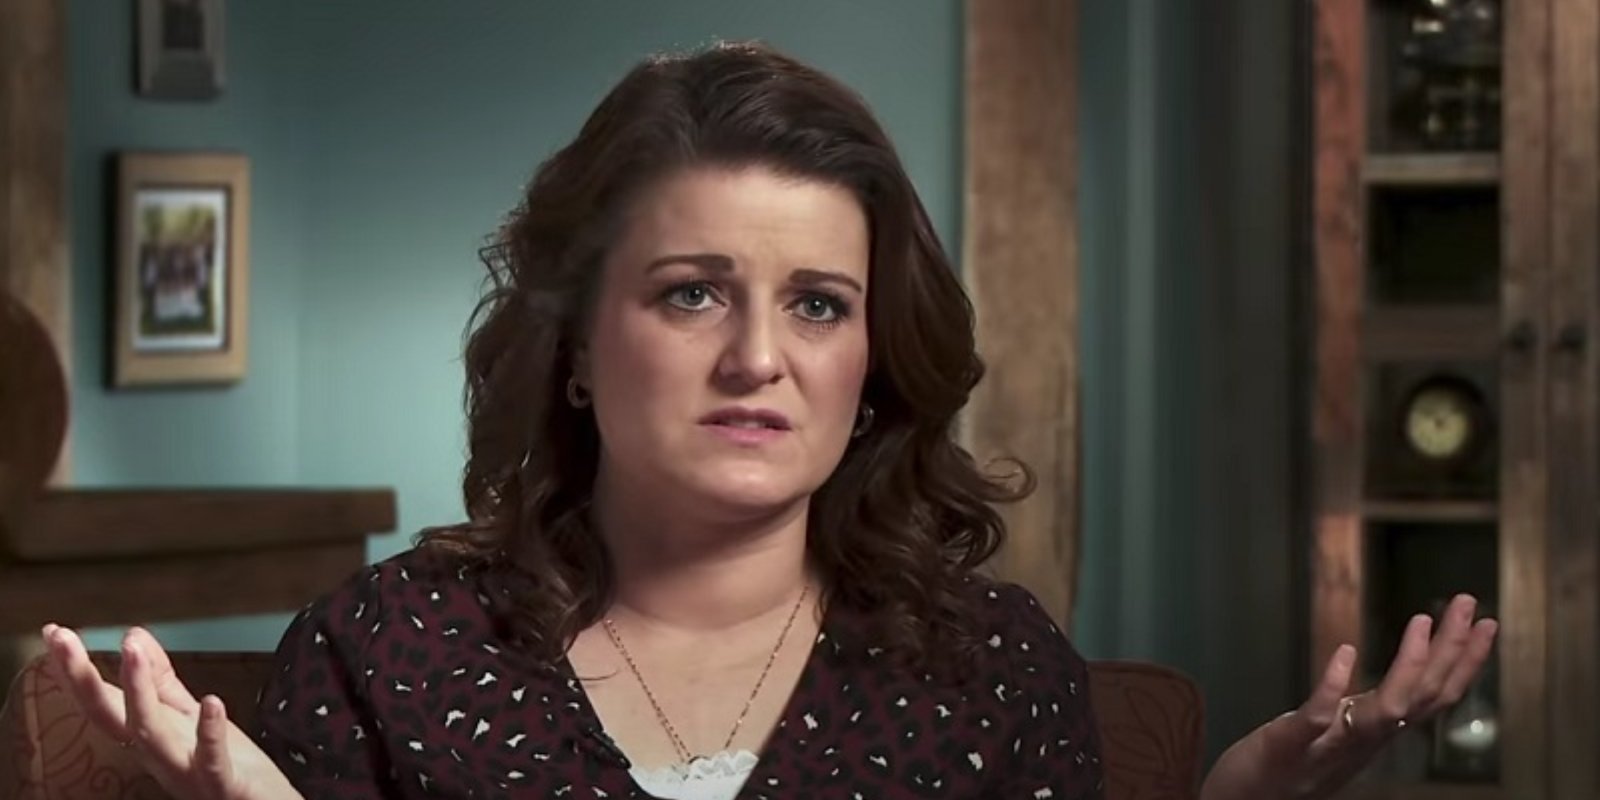 Old ‘Sister Wives’ Clips Prove ‘Hypocrite’ Robyn Brown is ‘Sneaky and Manipulative’ Claims Fans